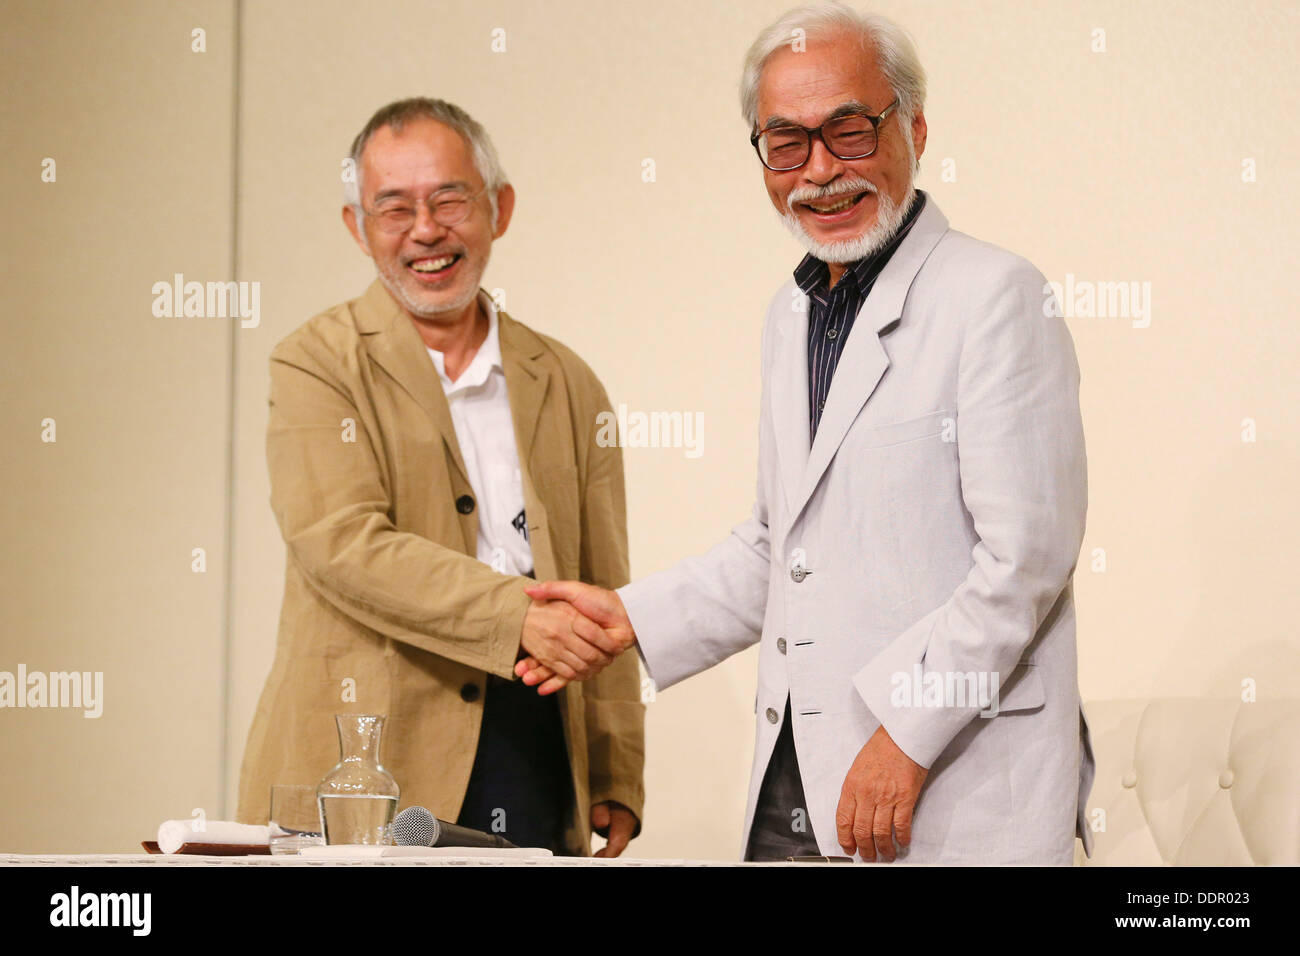 (L ro R) Toshio Suzuki, Hayao Miyazaki, September 6, 2013, Tokyo, Japan: Director Hayao Miyazaki announces his retirement from the animation industry during a press conference in Tokyo, Japan. Miyazaki co-founded studio Ghibli in 1985, after working for Toei Animation. His first movie was  'Laputa: Castle in the Sky' from 1986; since then he worked personally on 11 feature movies. His last movie 'The Wind Rises' (Jap: 'Kaze-tachinu') which is already a box office hit in Japan, was presented at Venice Film Festival last Sunday September 1st and will be screened worldwide. The movie, about the J Stock Photo